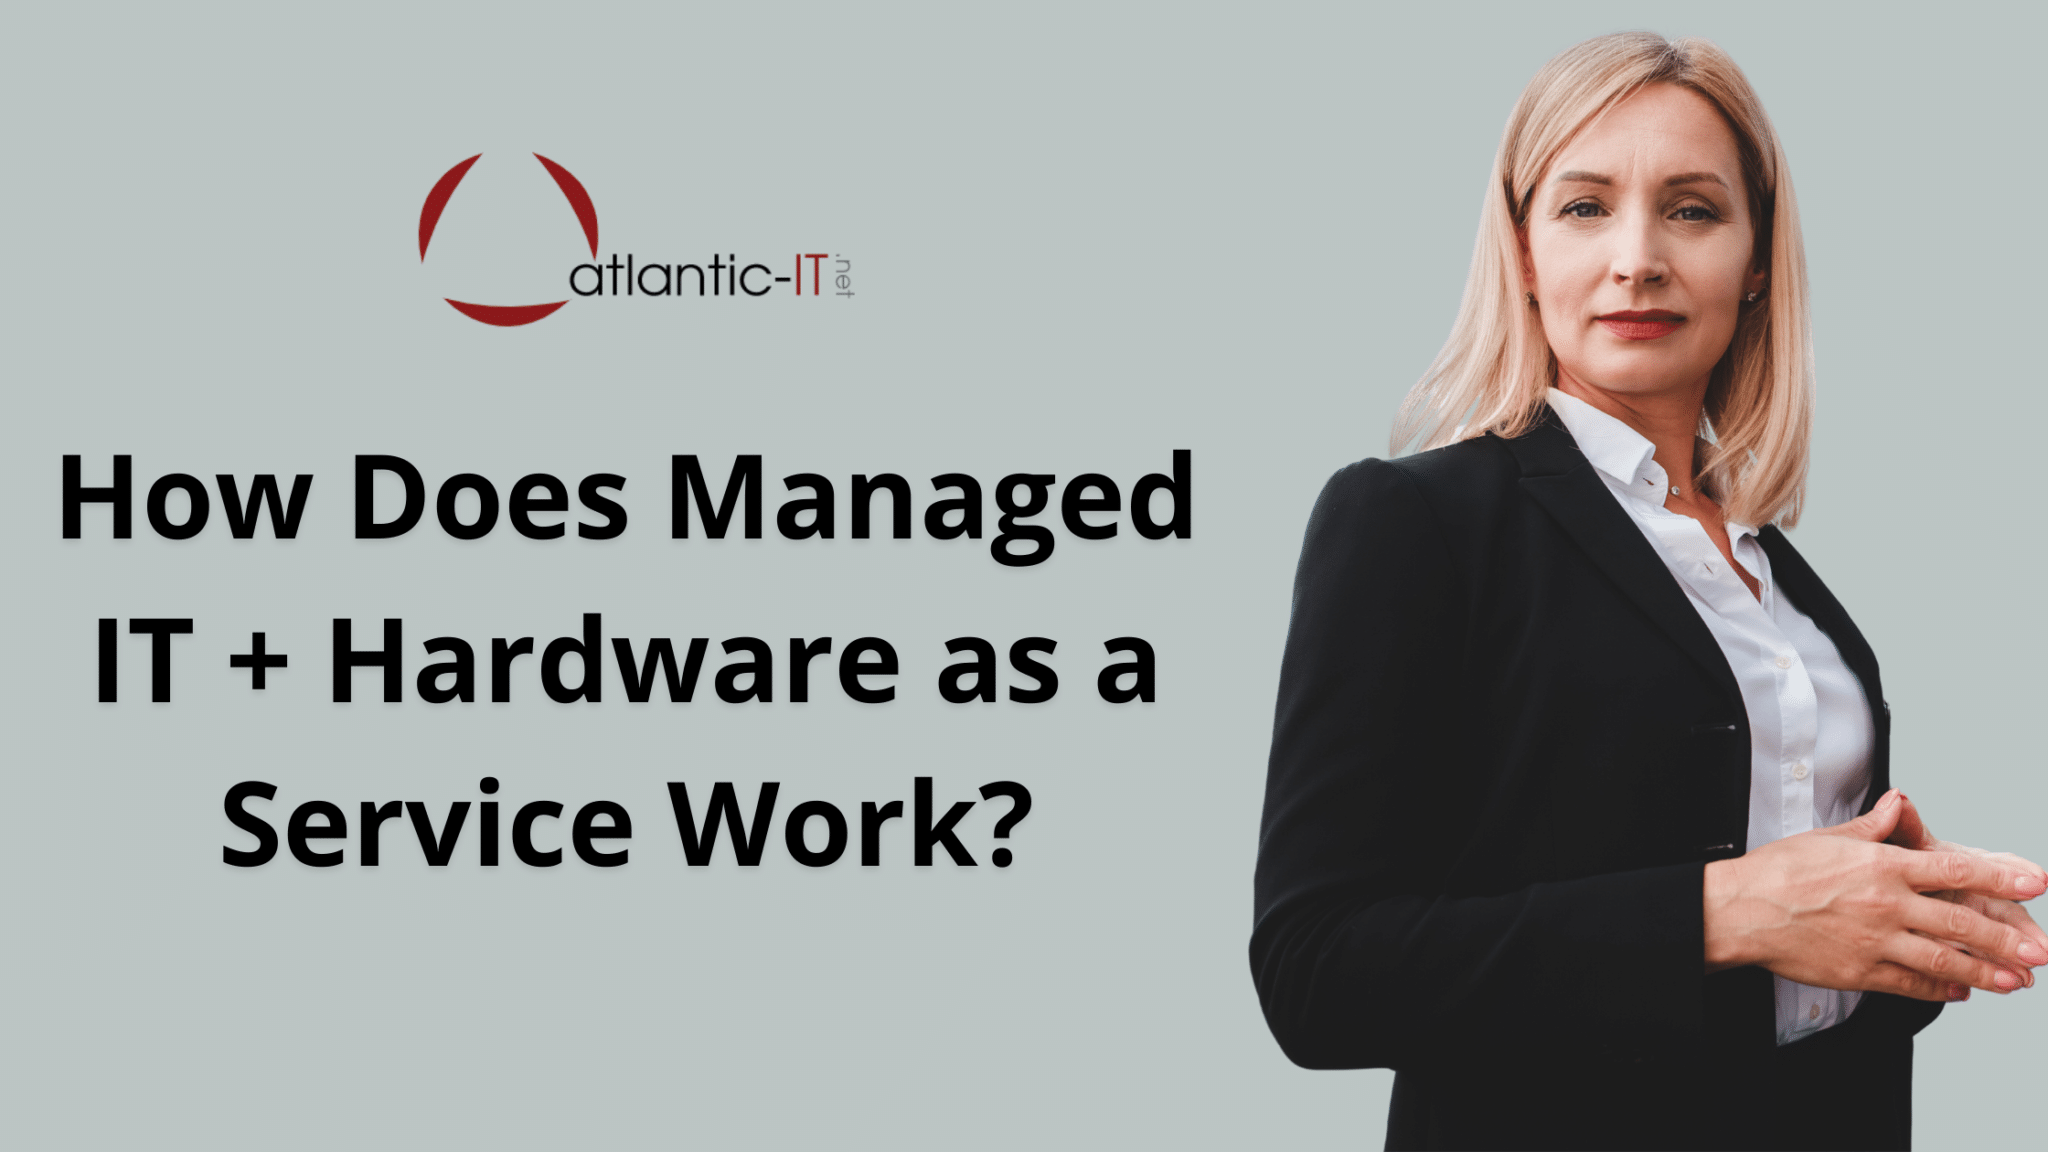 How Does Managed IT + Hardware as a Service Work?